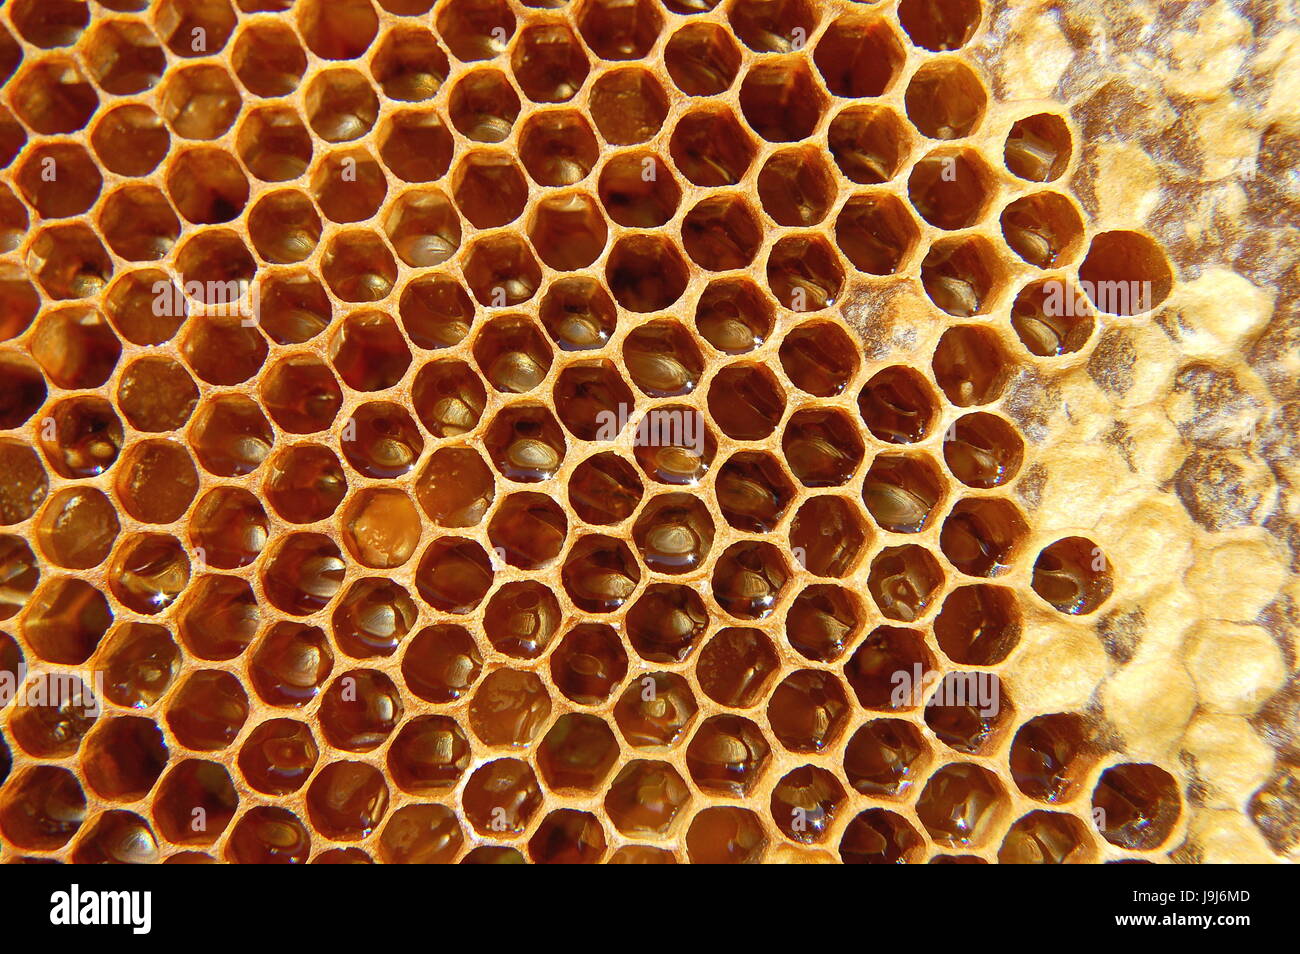 Download Wax Wallpaper Honeycomb Yellow Insect Bee Texture Natural Stock Photo Alamy Yellowimages Mockups